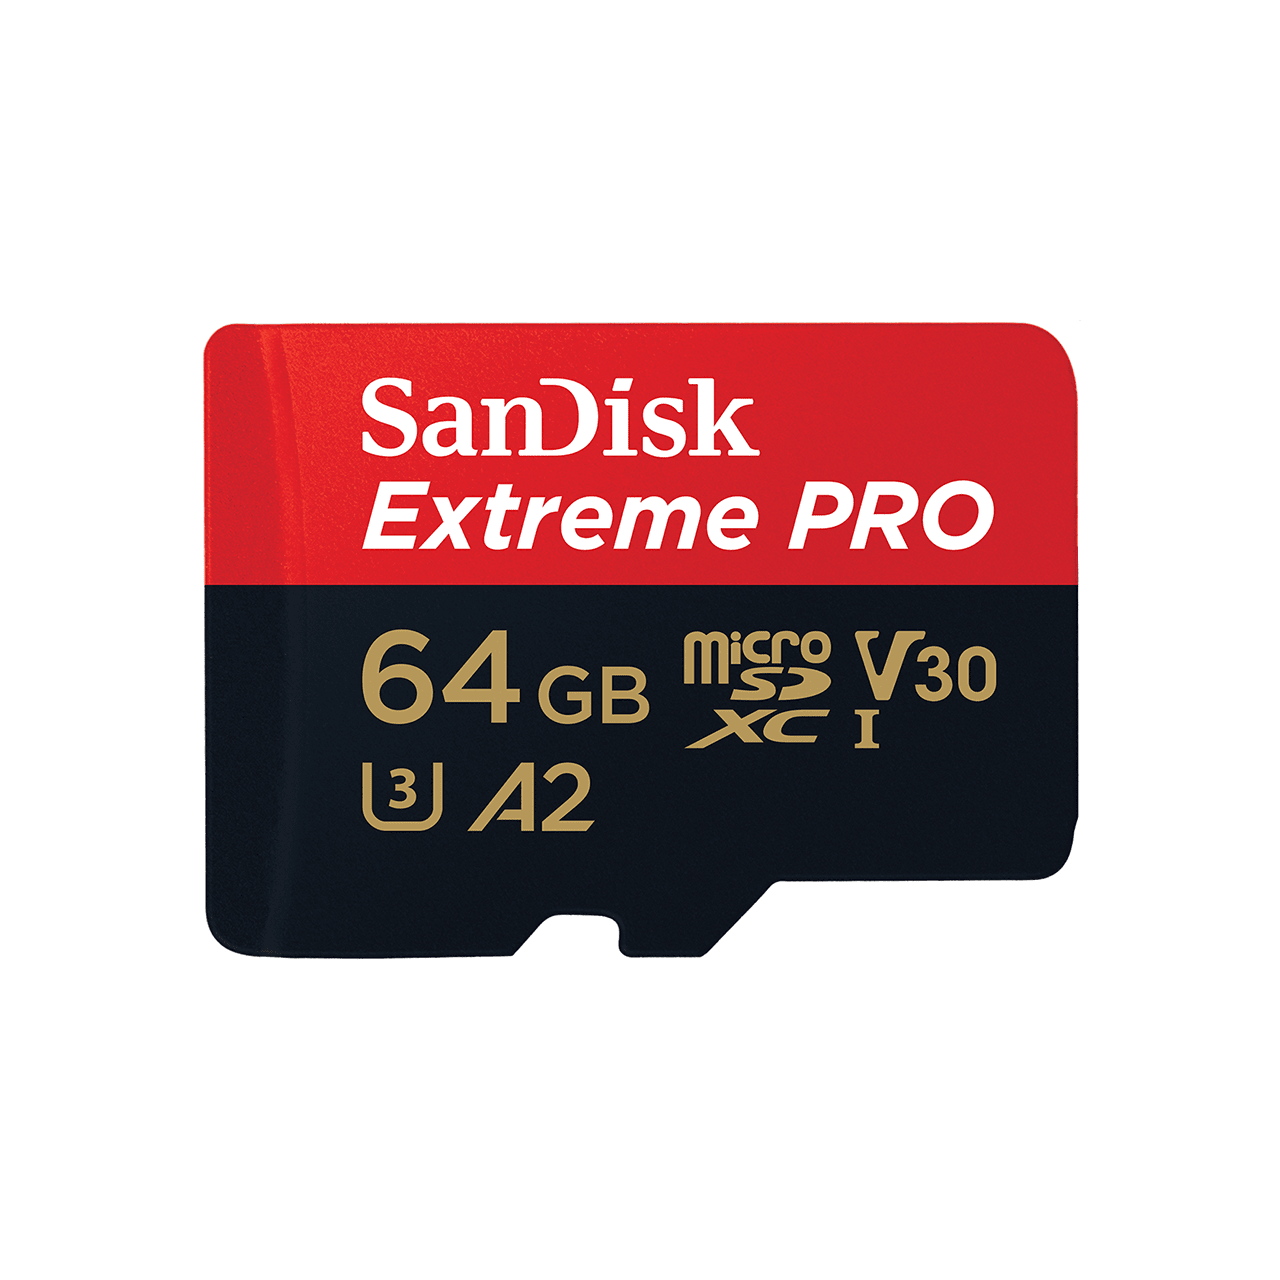 Sandisk Extreme Pro Micro SD UHS-I 32GB/64GB/128GB/256GB/400GB Class 10 for Full HD video U3 4K microSDXC/microSDHC Memory Card With Adapter (R:Up to 160MB/s;W: Up to 90MB/s)